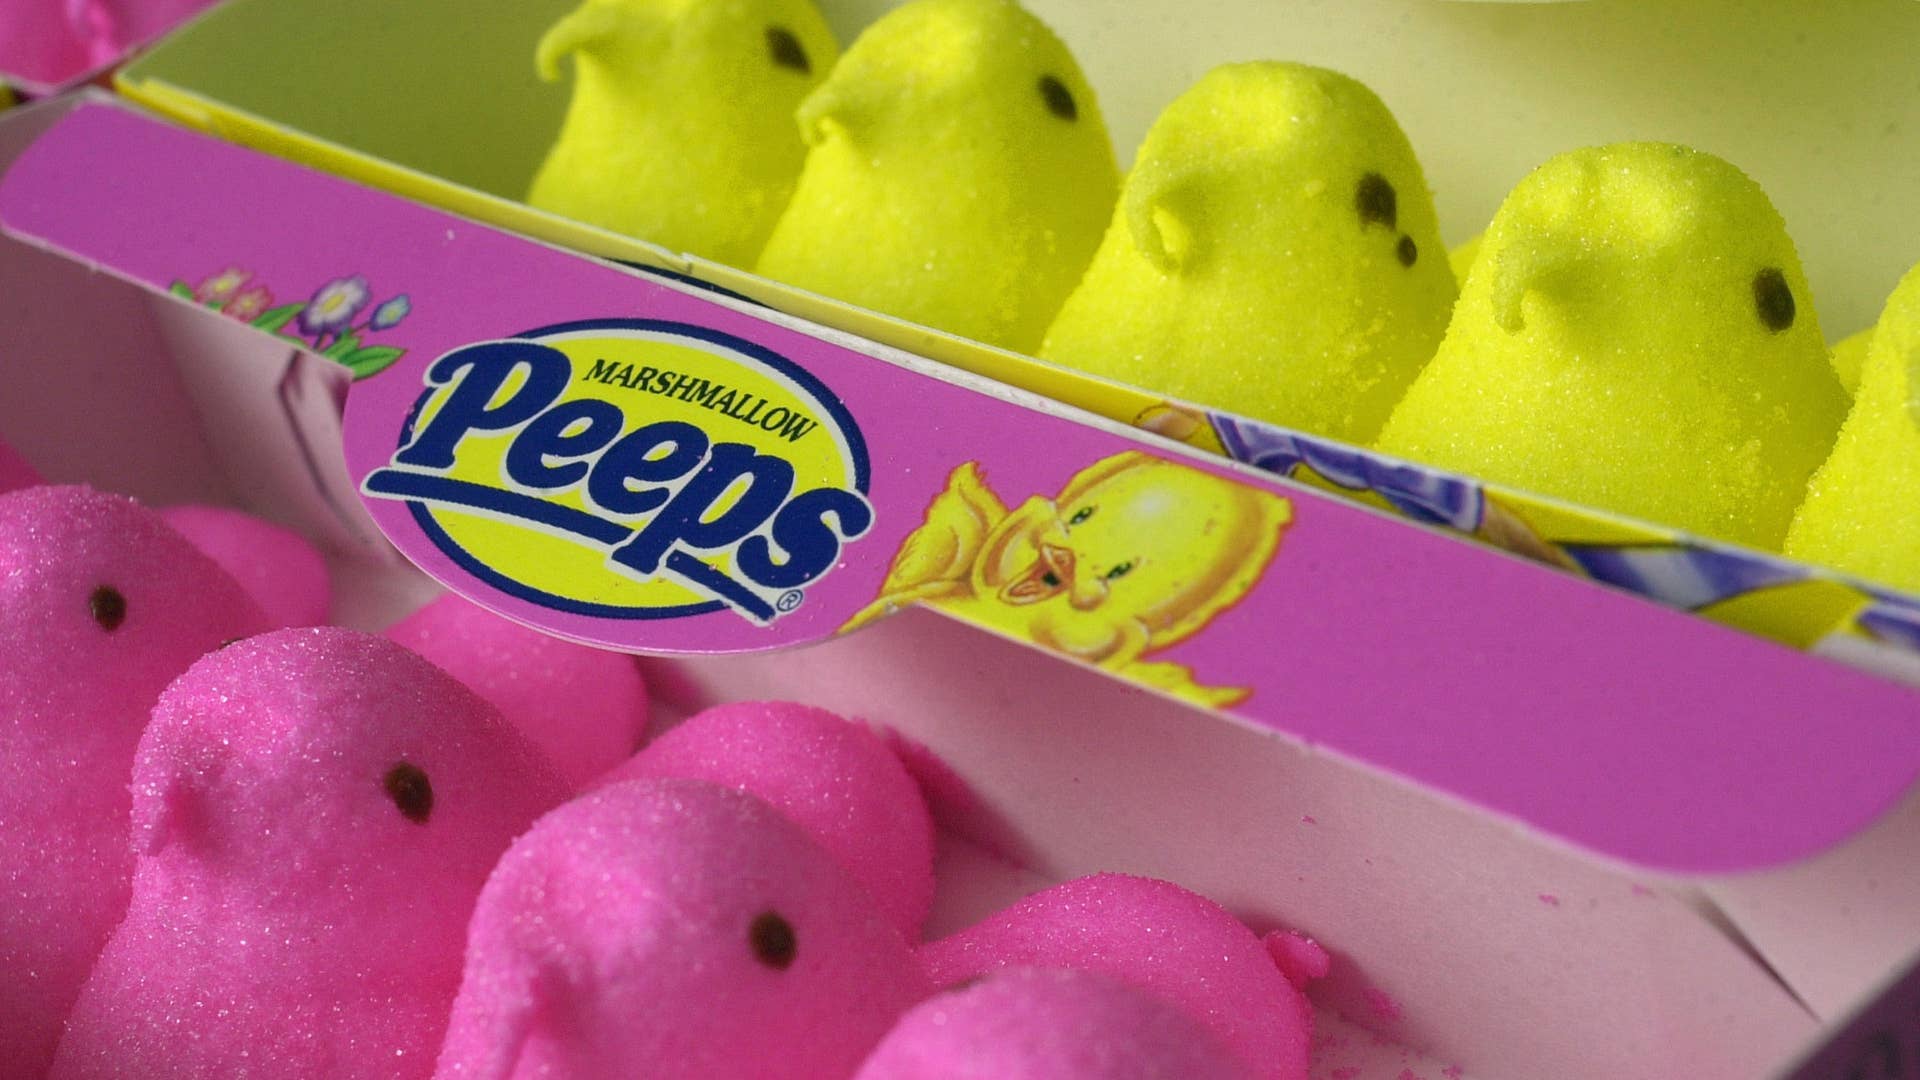 Pink and yellow Marshmallow Peeps are seen April 18, 2003.